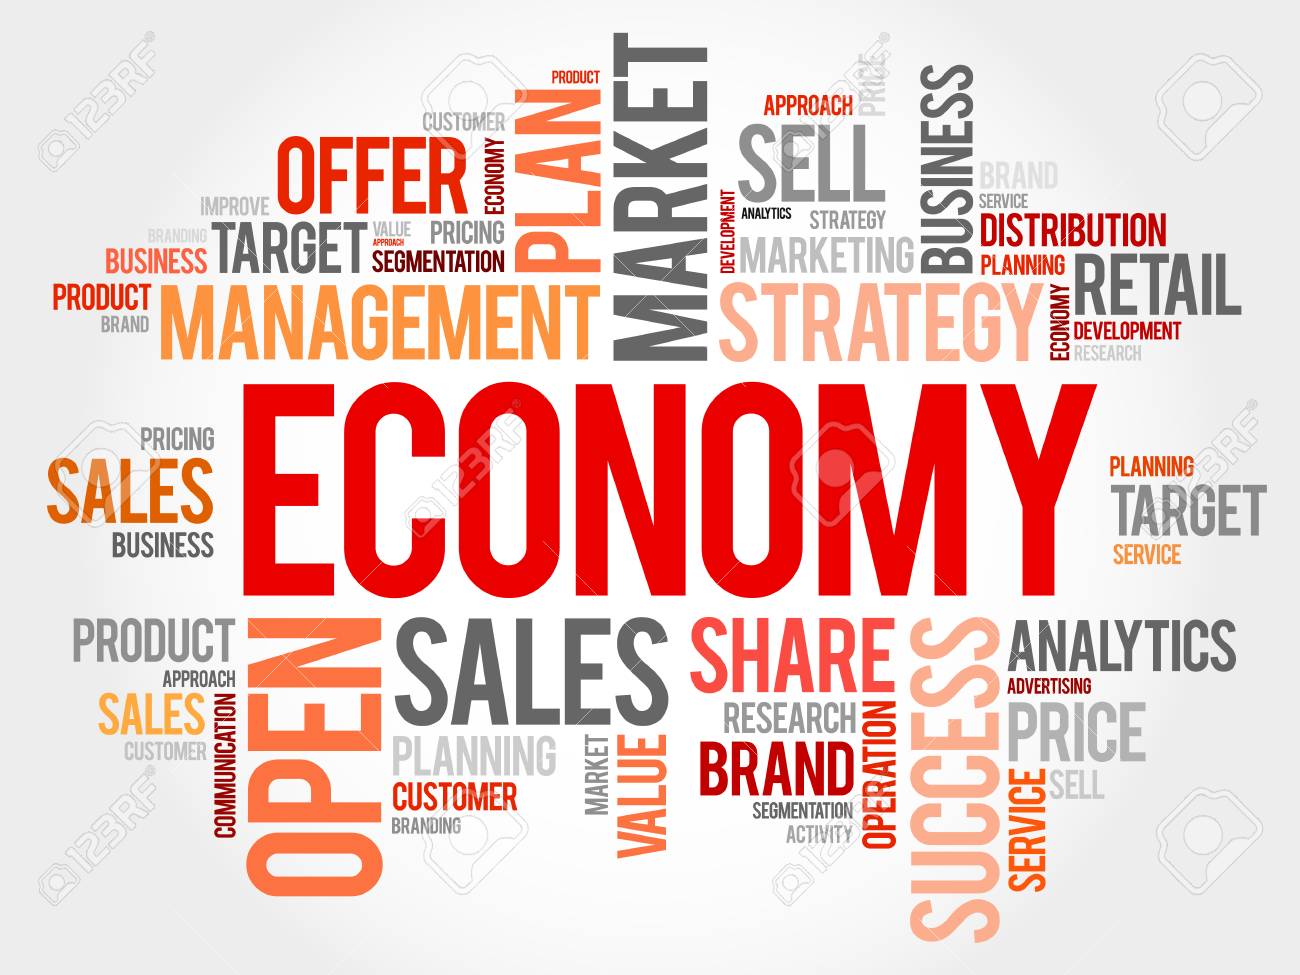 ECONOMY word cloud collage, business concept background